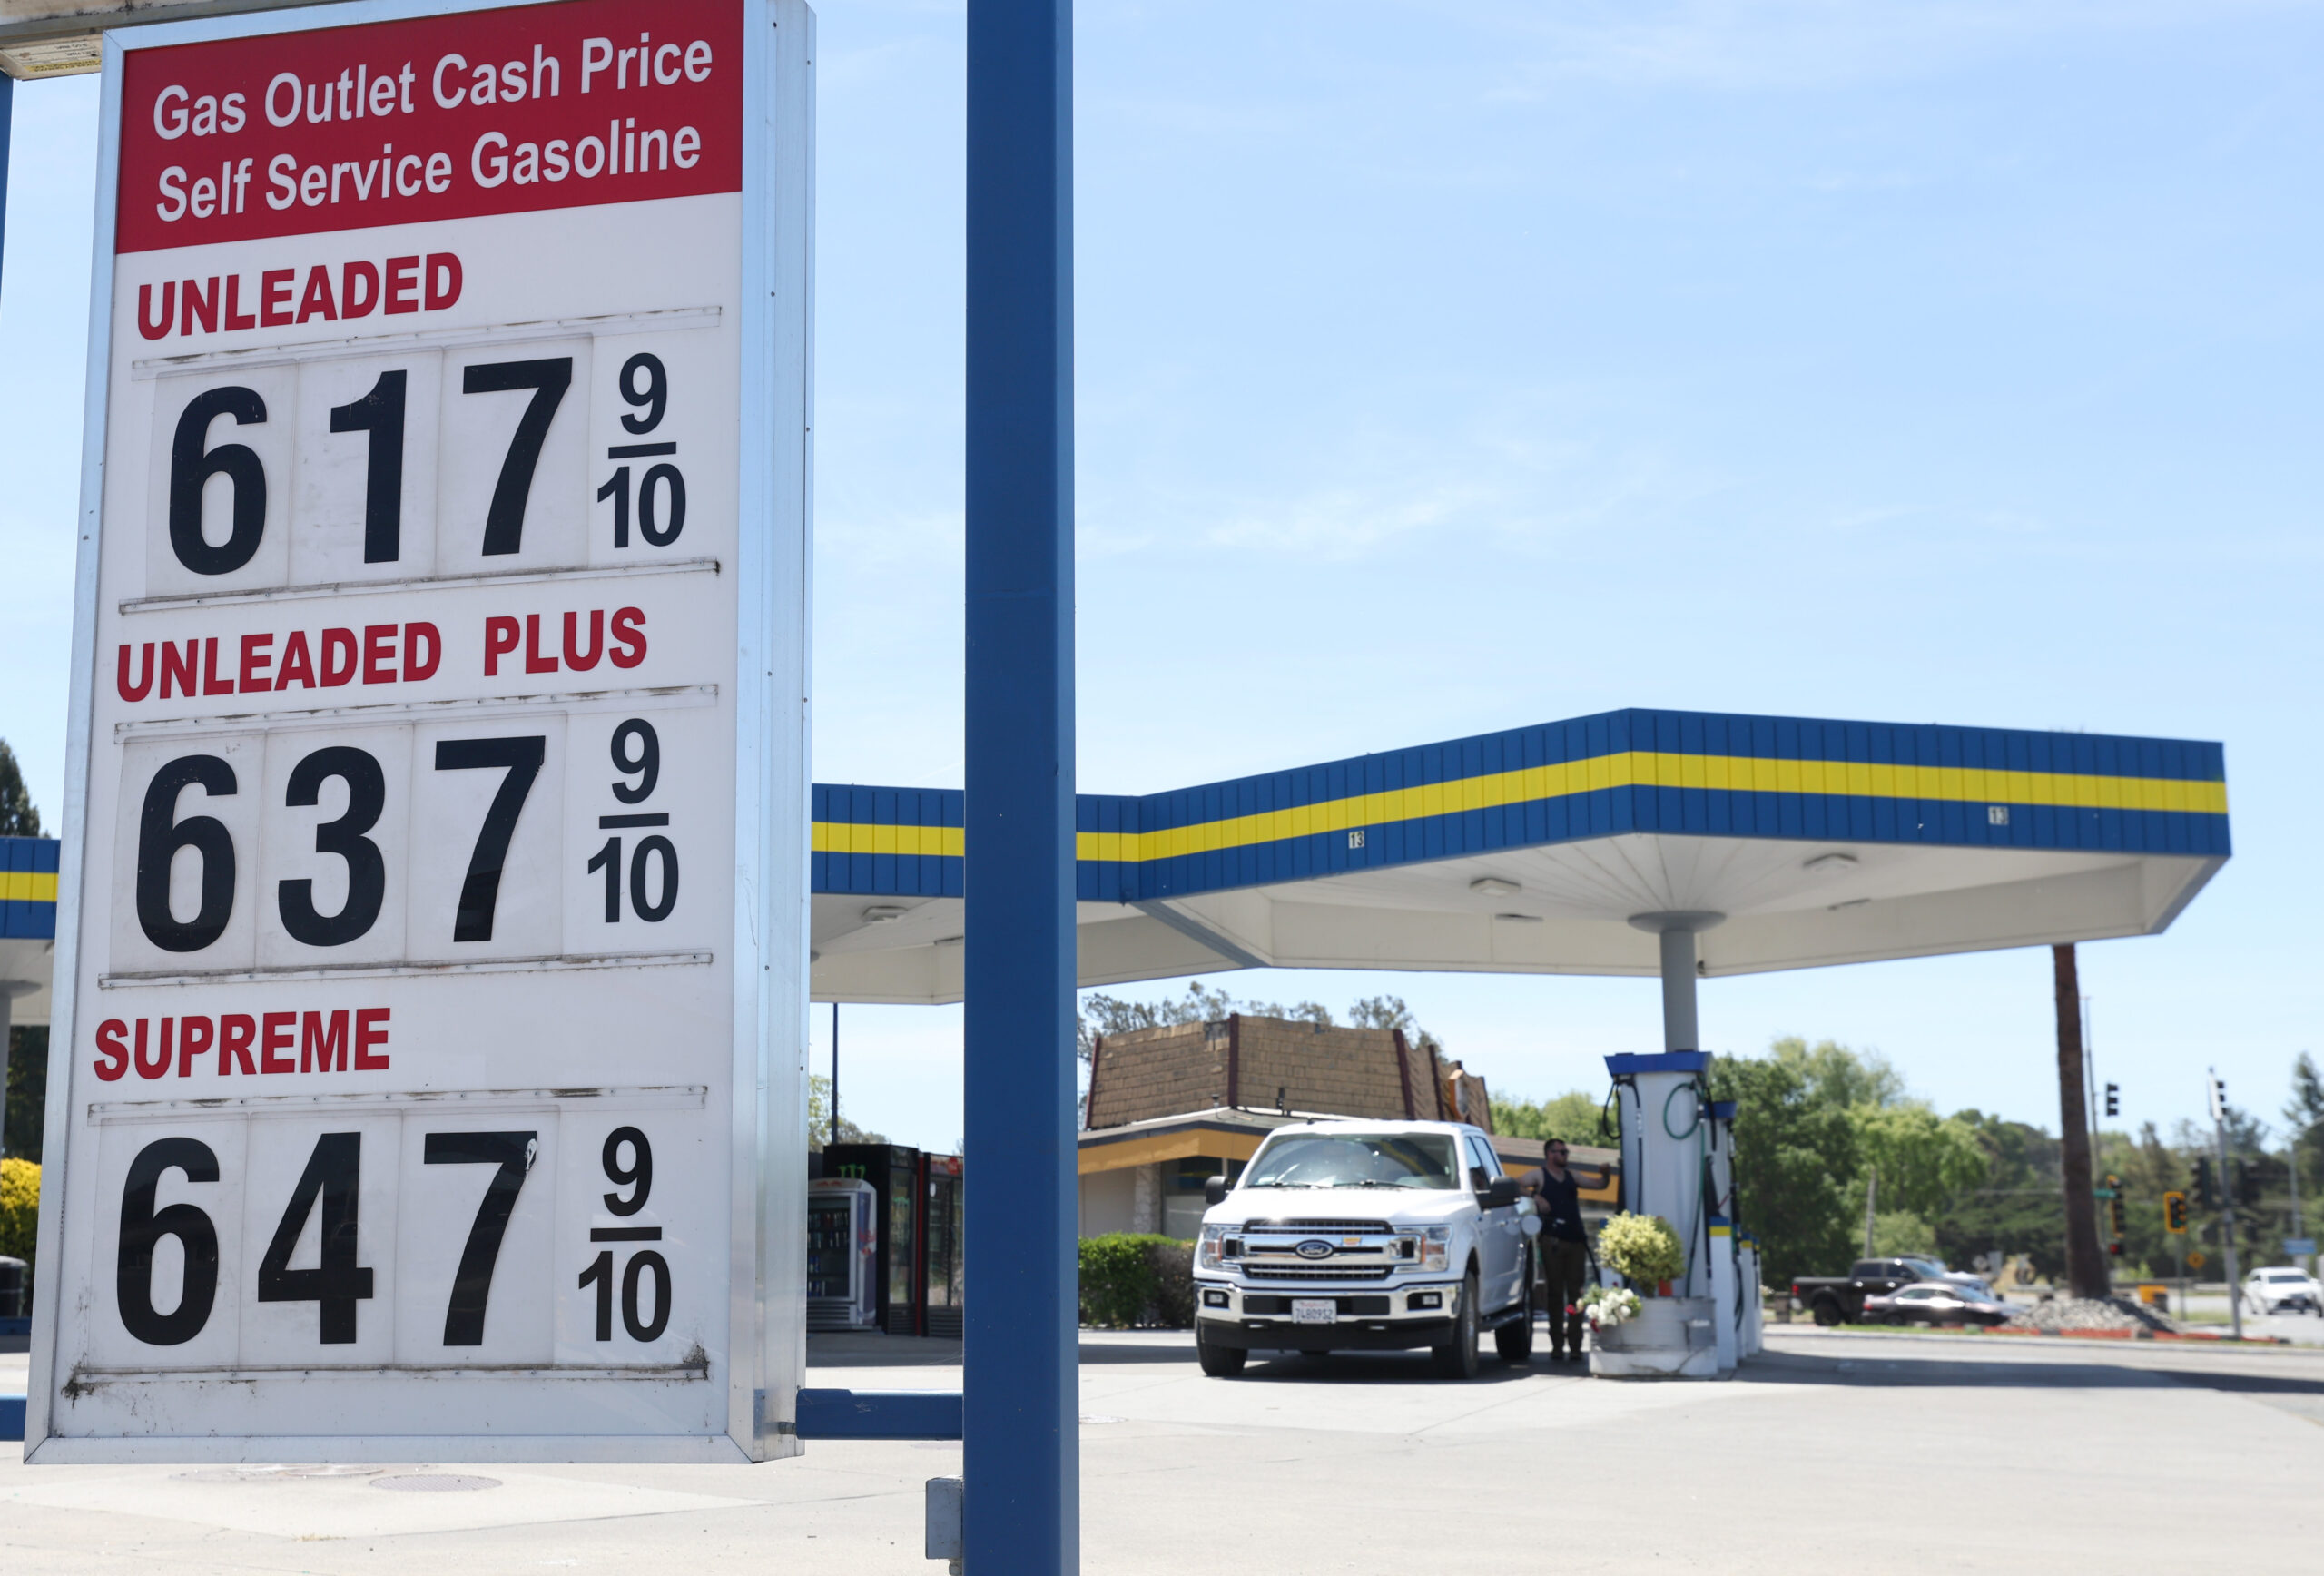 Image of gas prices following approval of the gas price gouging bill